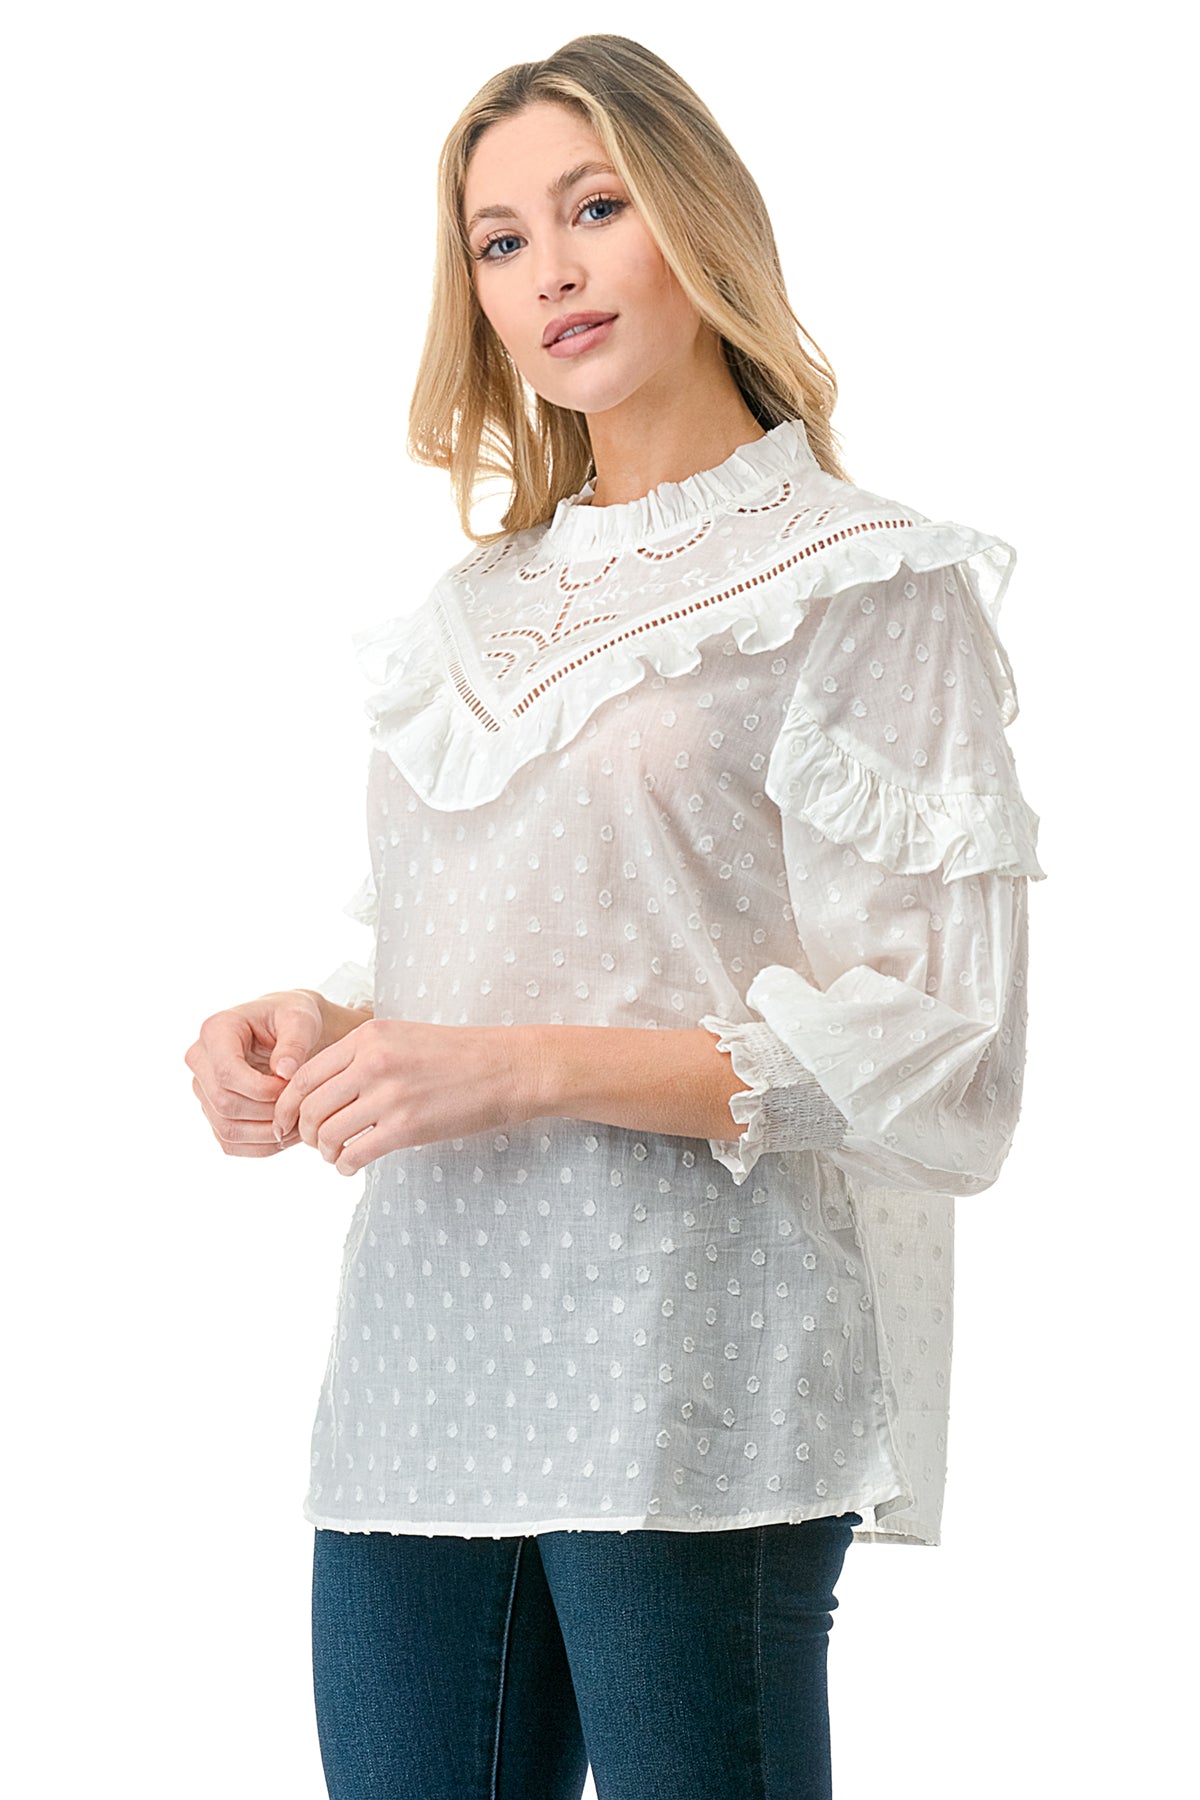 White Texture Fabric Embroidered Cutout Bib Blouse